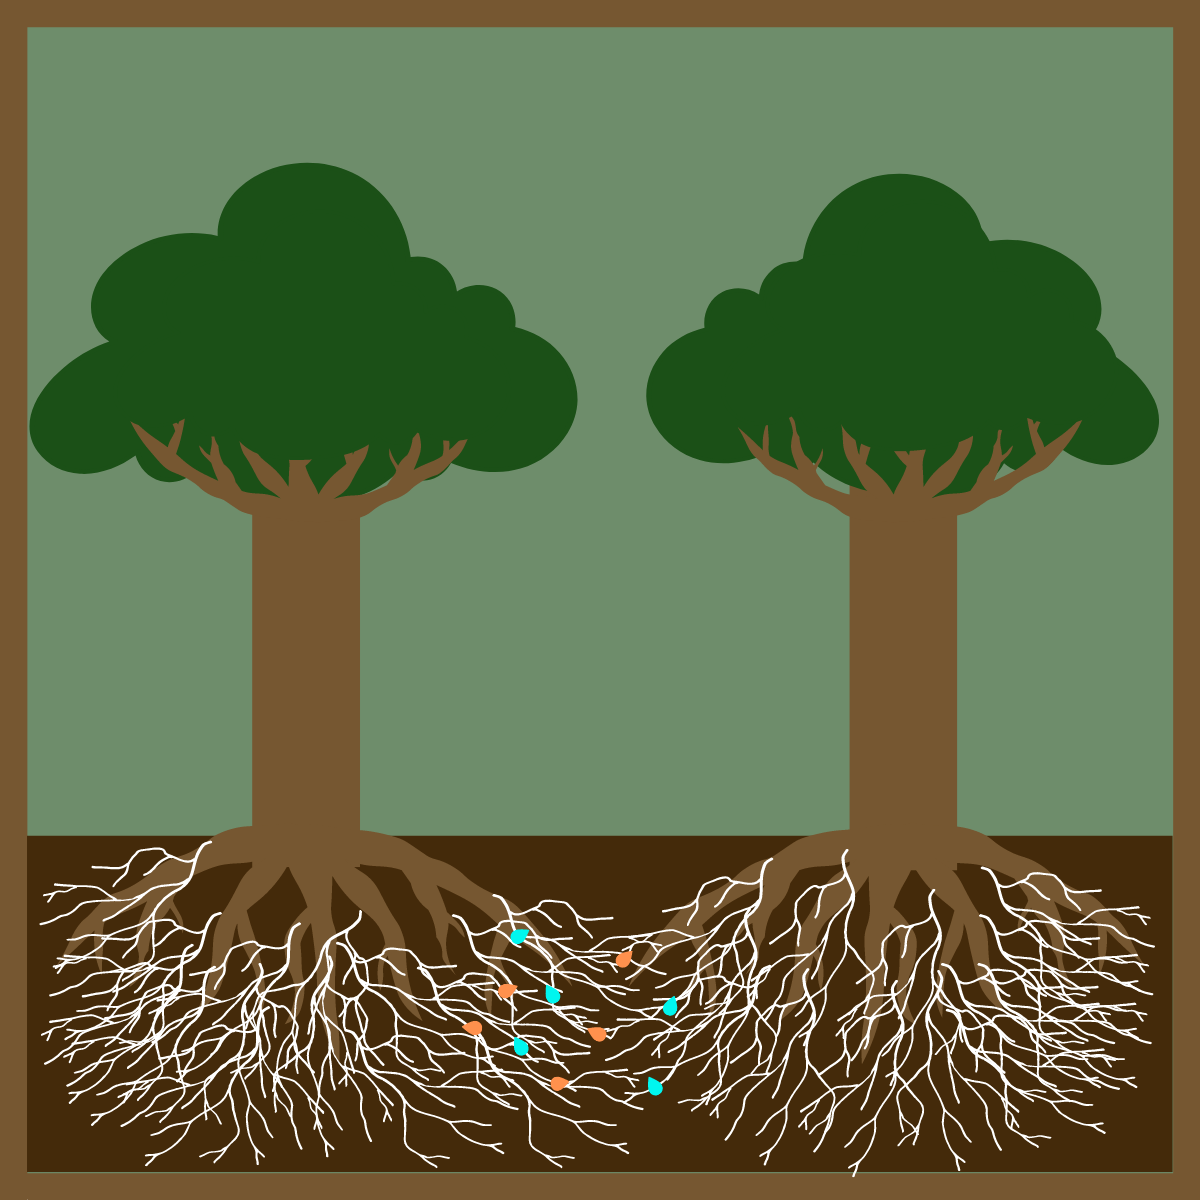 Diagram of Fungal Networks Exchanging Nutrients between Two Trees